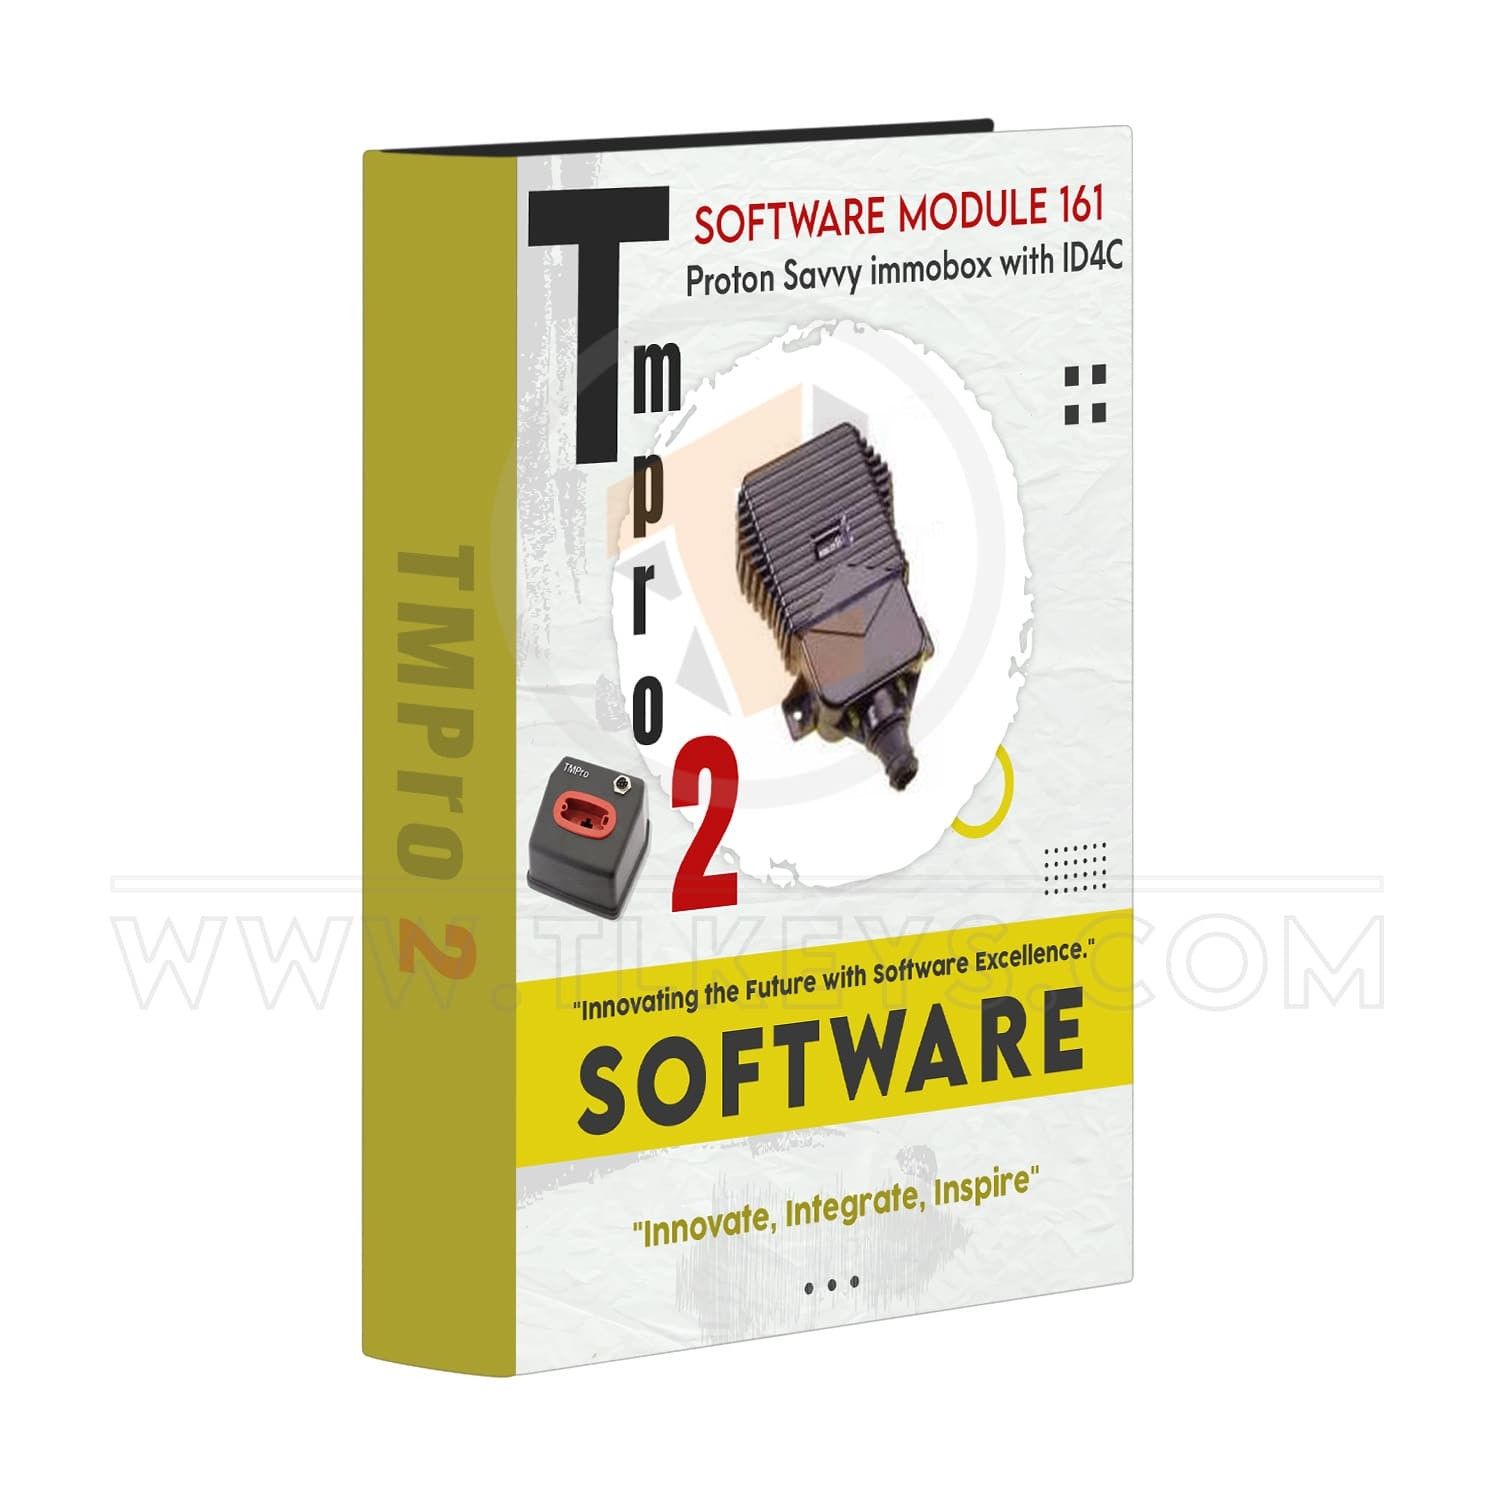 TMPRO Tmpro 2 Tmpro 2 Software module 161 – Proton Savvy immobox with ID